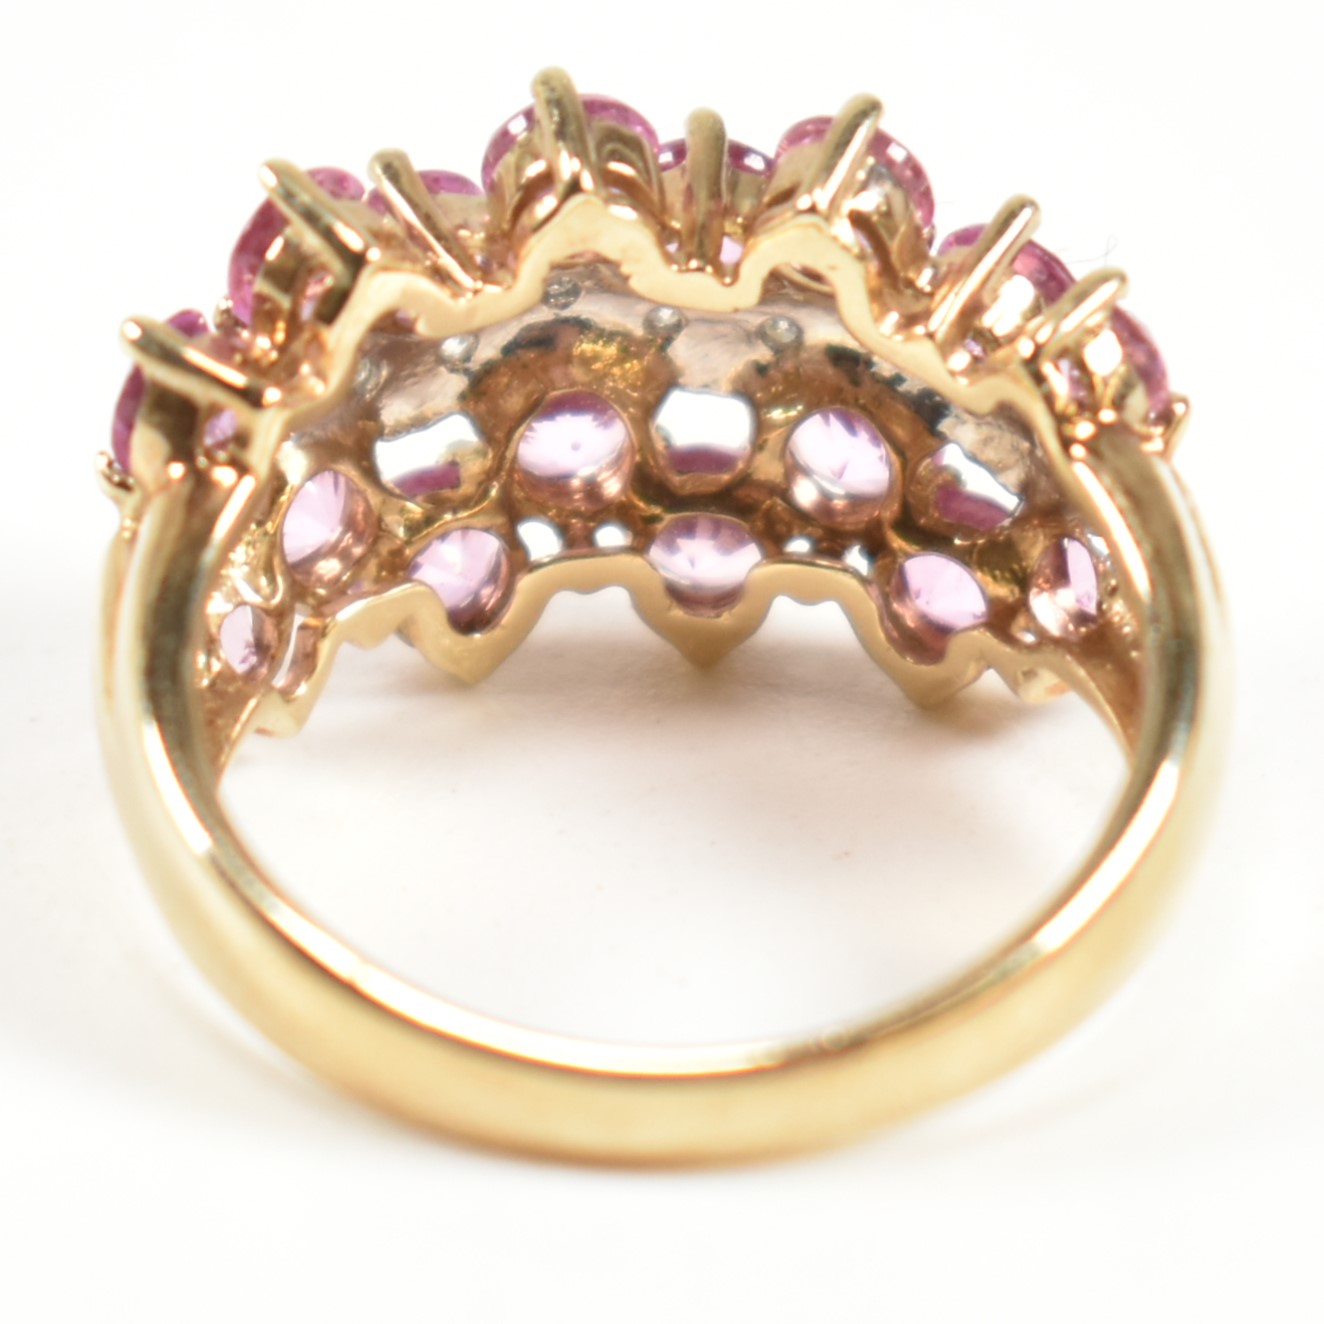 HALLMARKED 9CT GOLD PINK SAPPHIRE & DIAMOND CLUSTER RING - Image 2 of 9